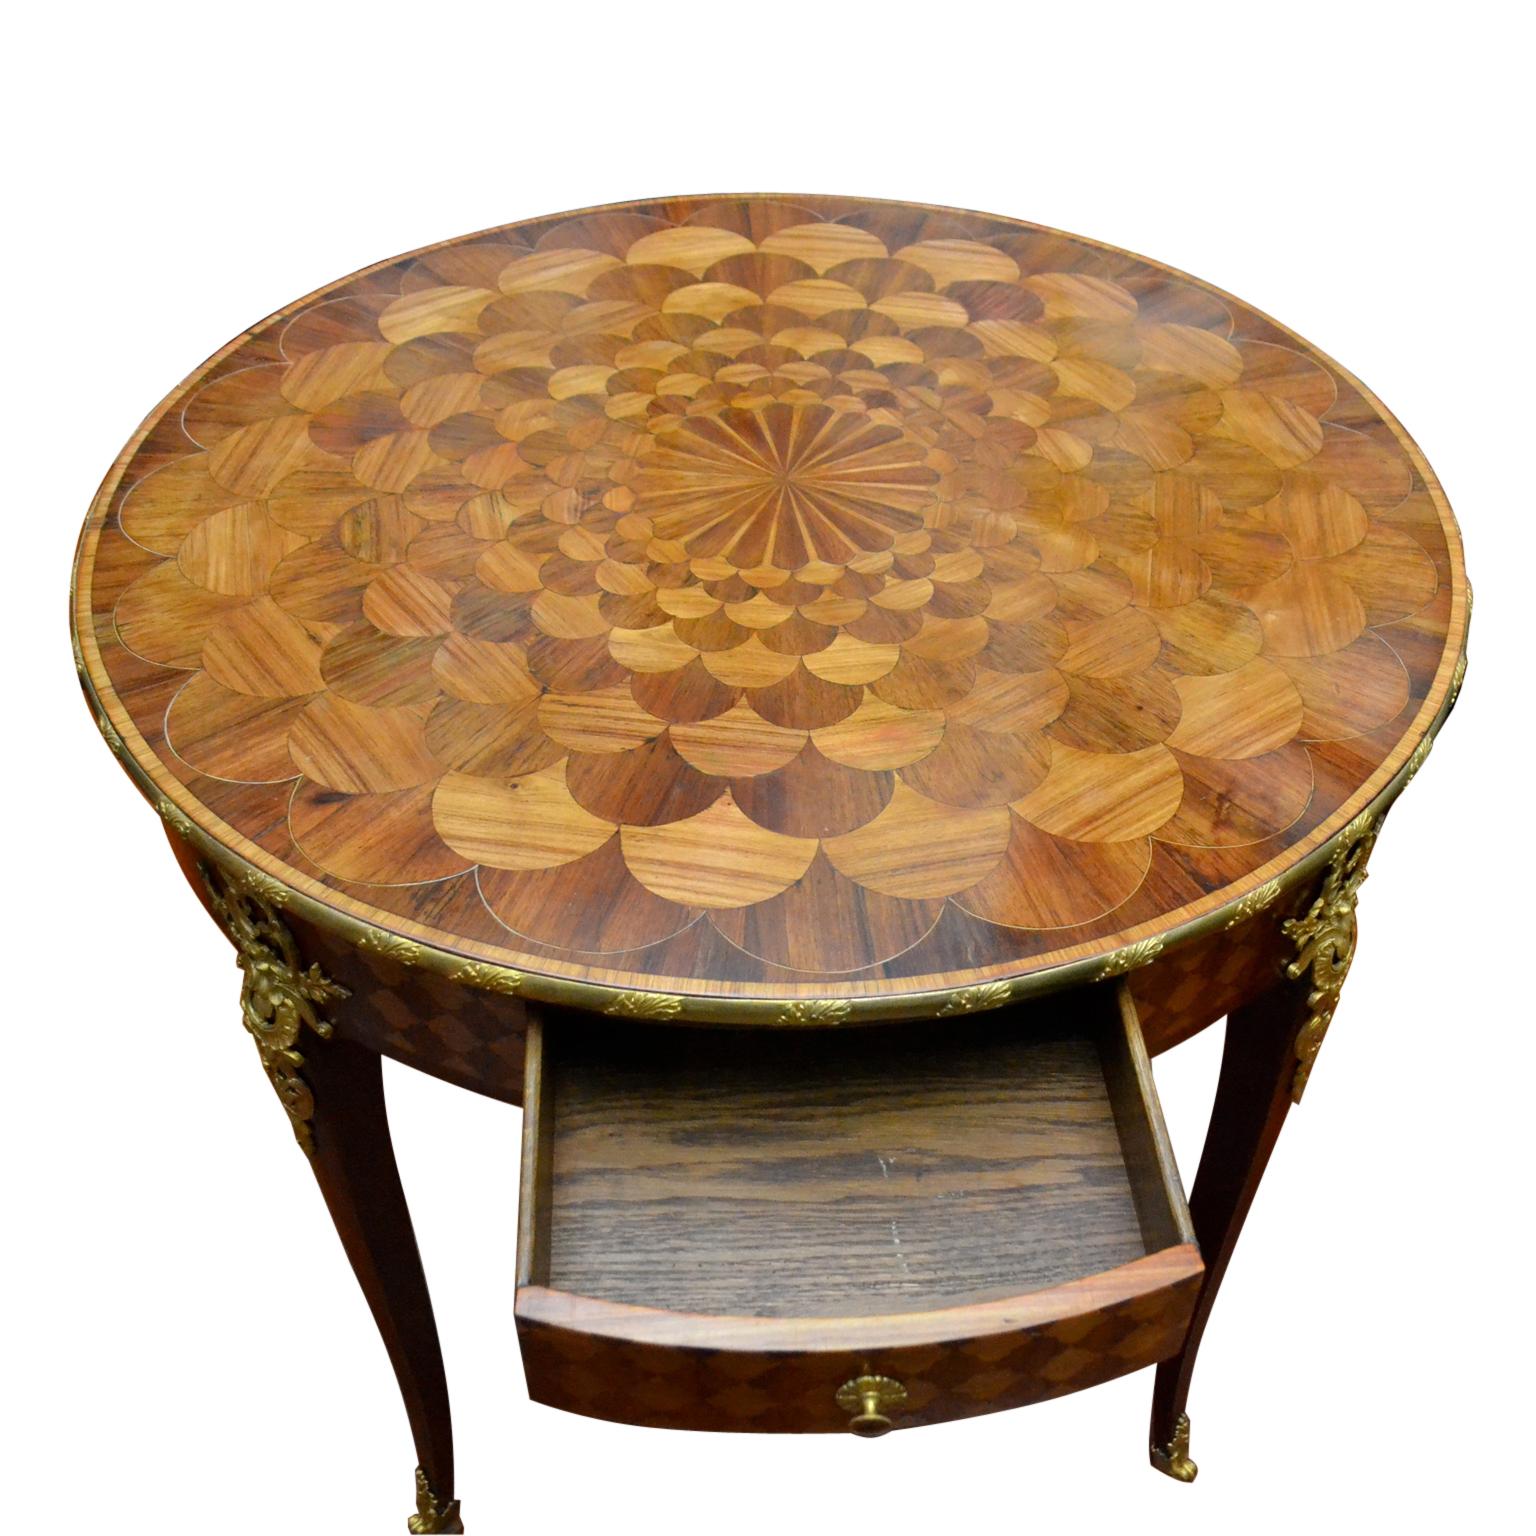 French, Marquetry and Gilt Bronze Round Centre Table Attributed to Linke 1